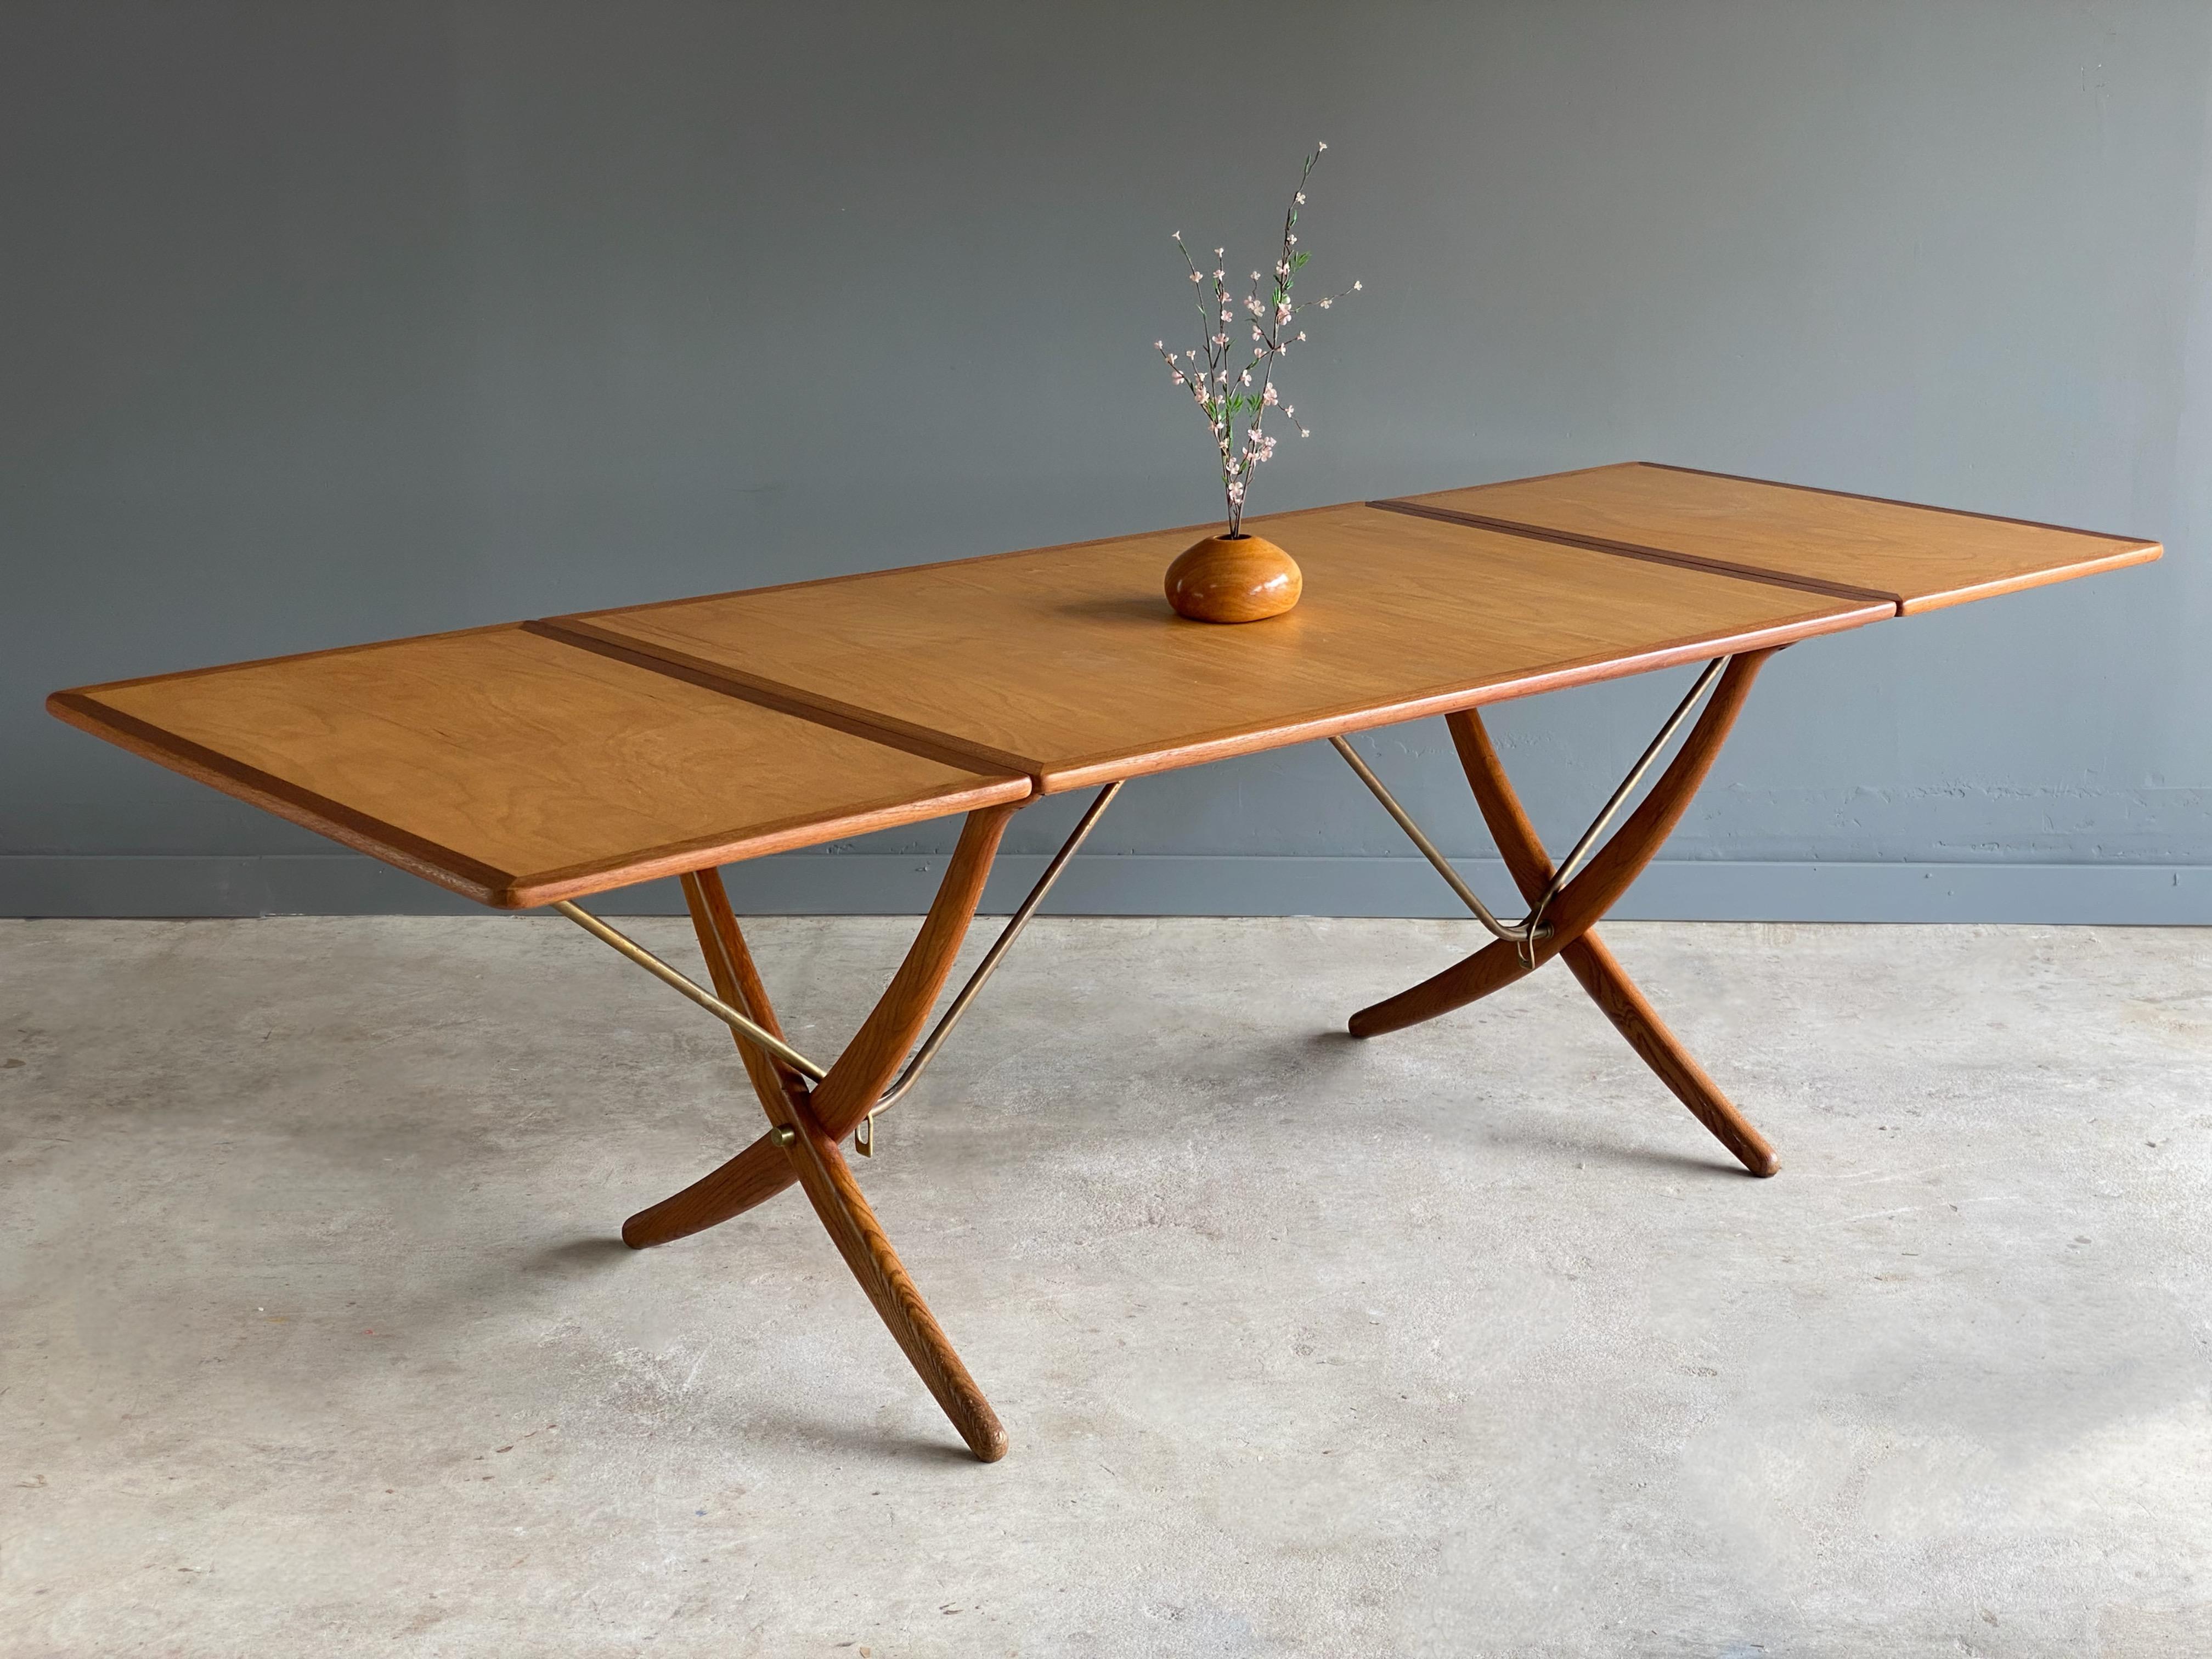 Stunning and likely one of kind variation of Hans J. Wegner for Andreas Tuck model AT-304. What makes this table special, is it's European beech top. Usually seen in oak and/or teak, this example features a rich yet light colored beech top with teak